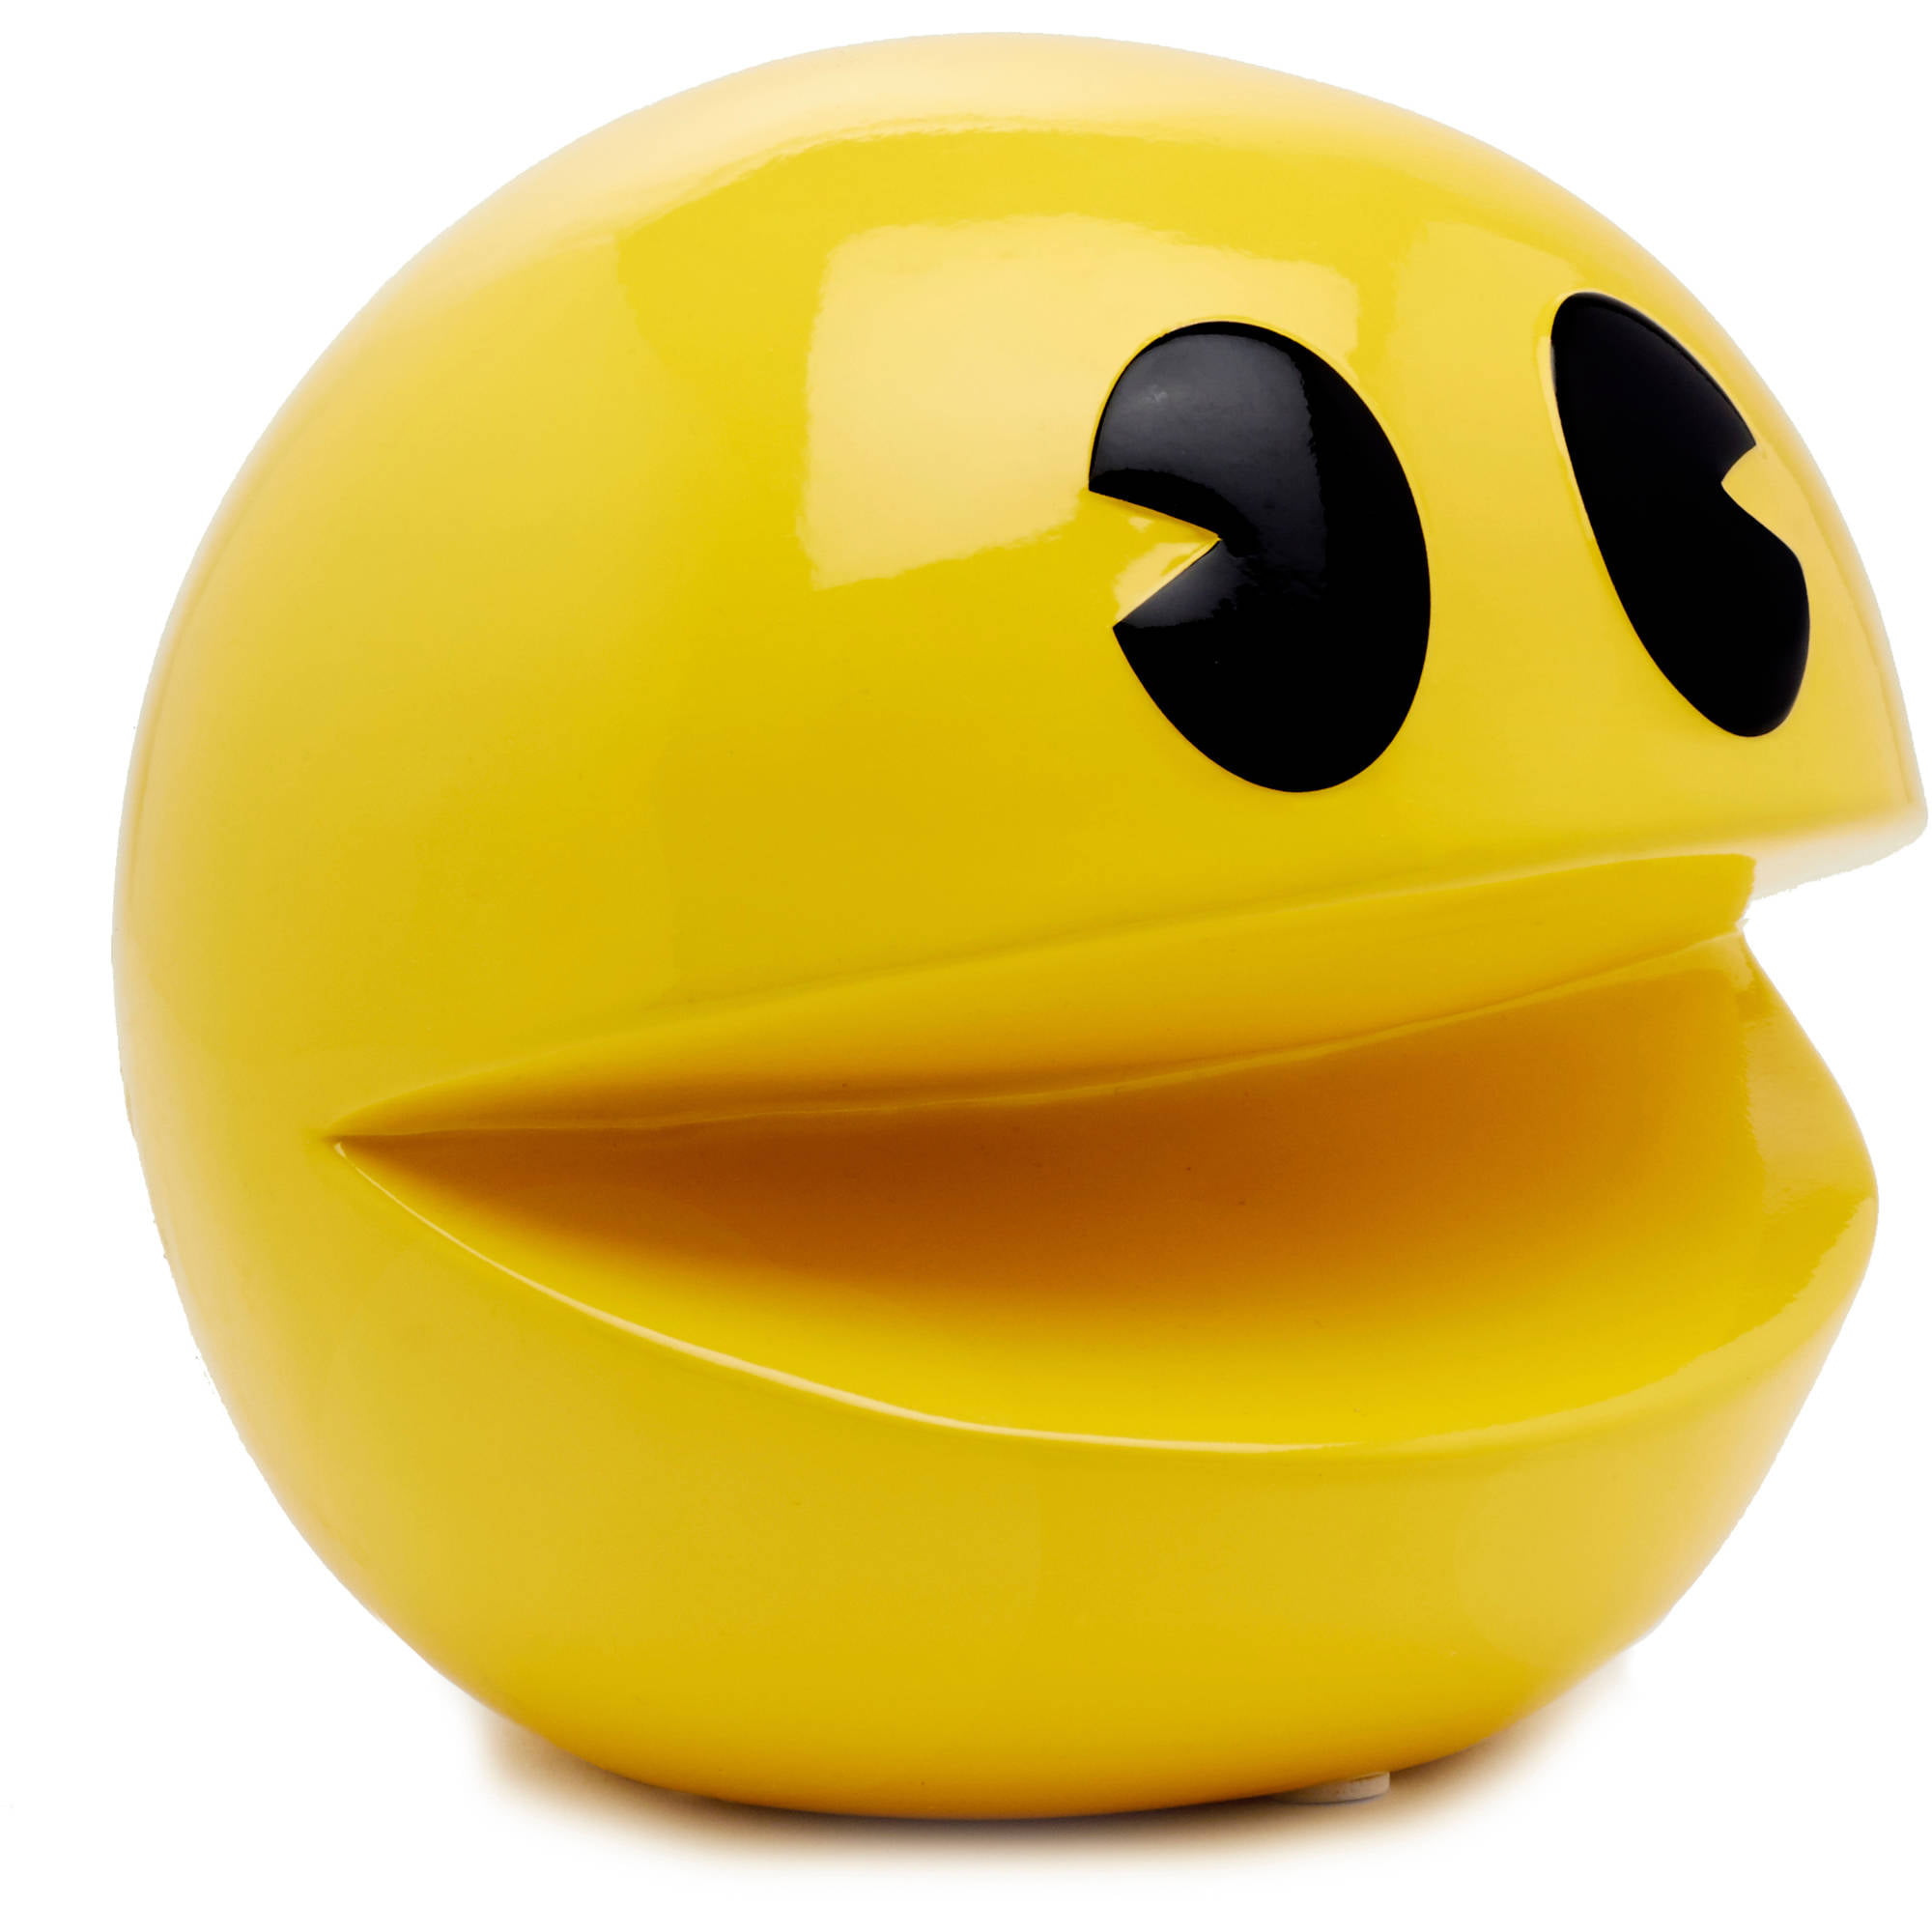 Pacman For Mac